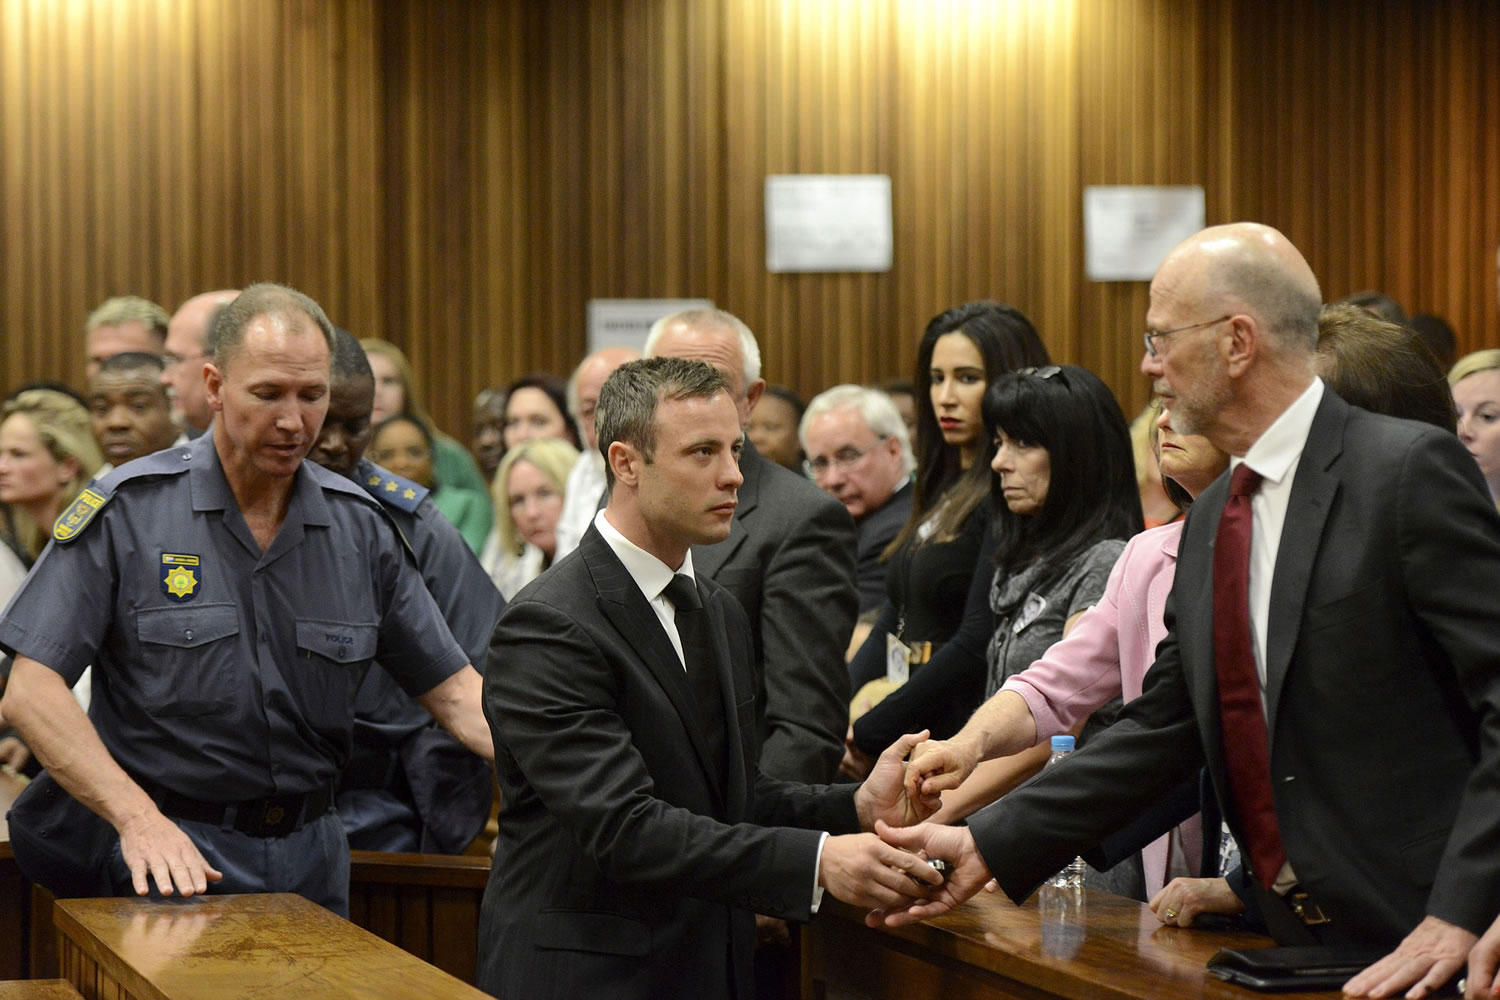 Oscar Pistorius, left, greets his uncle Arnold Pistorius, right, and other family members as he is led down to the cells of the court in Pretoria, South Africa, today.